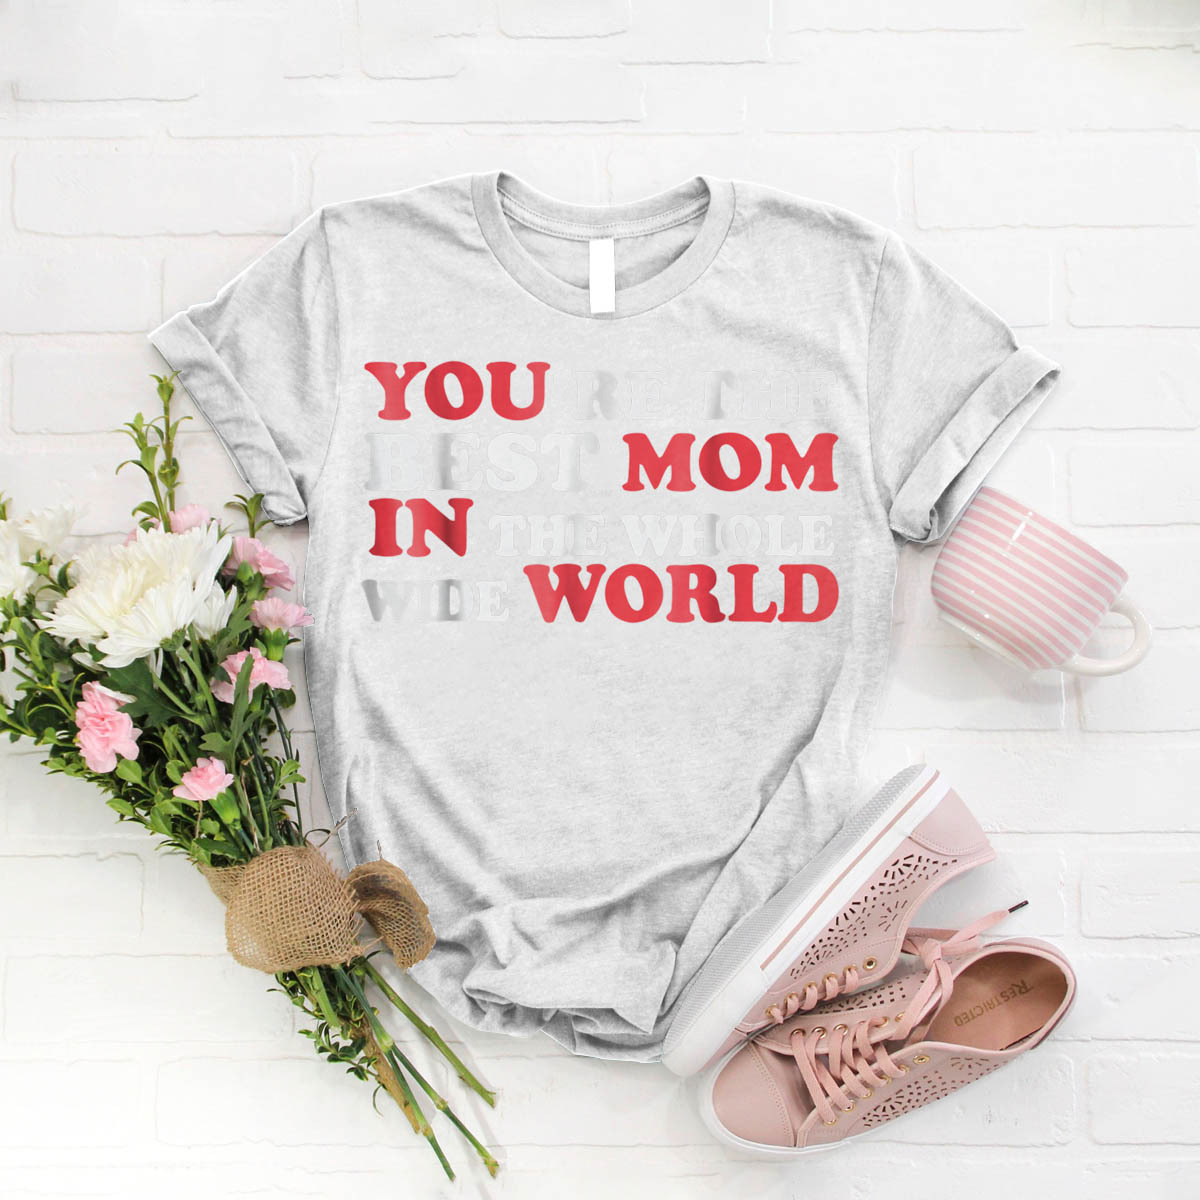 You'Re The Best Mom In The Whole Wide World - T-Shirts